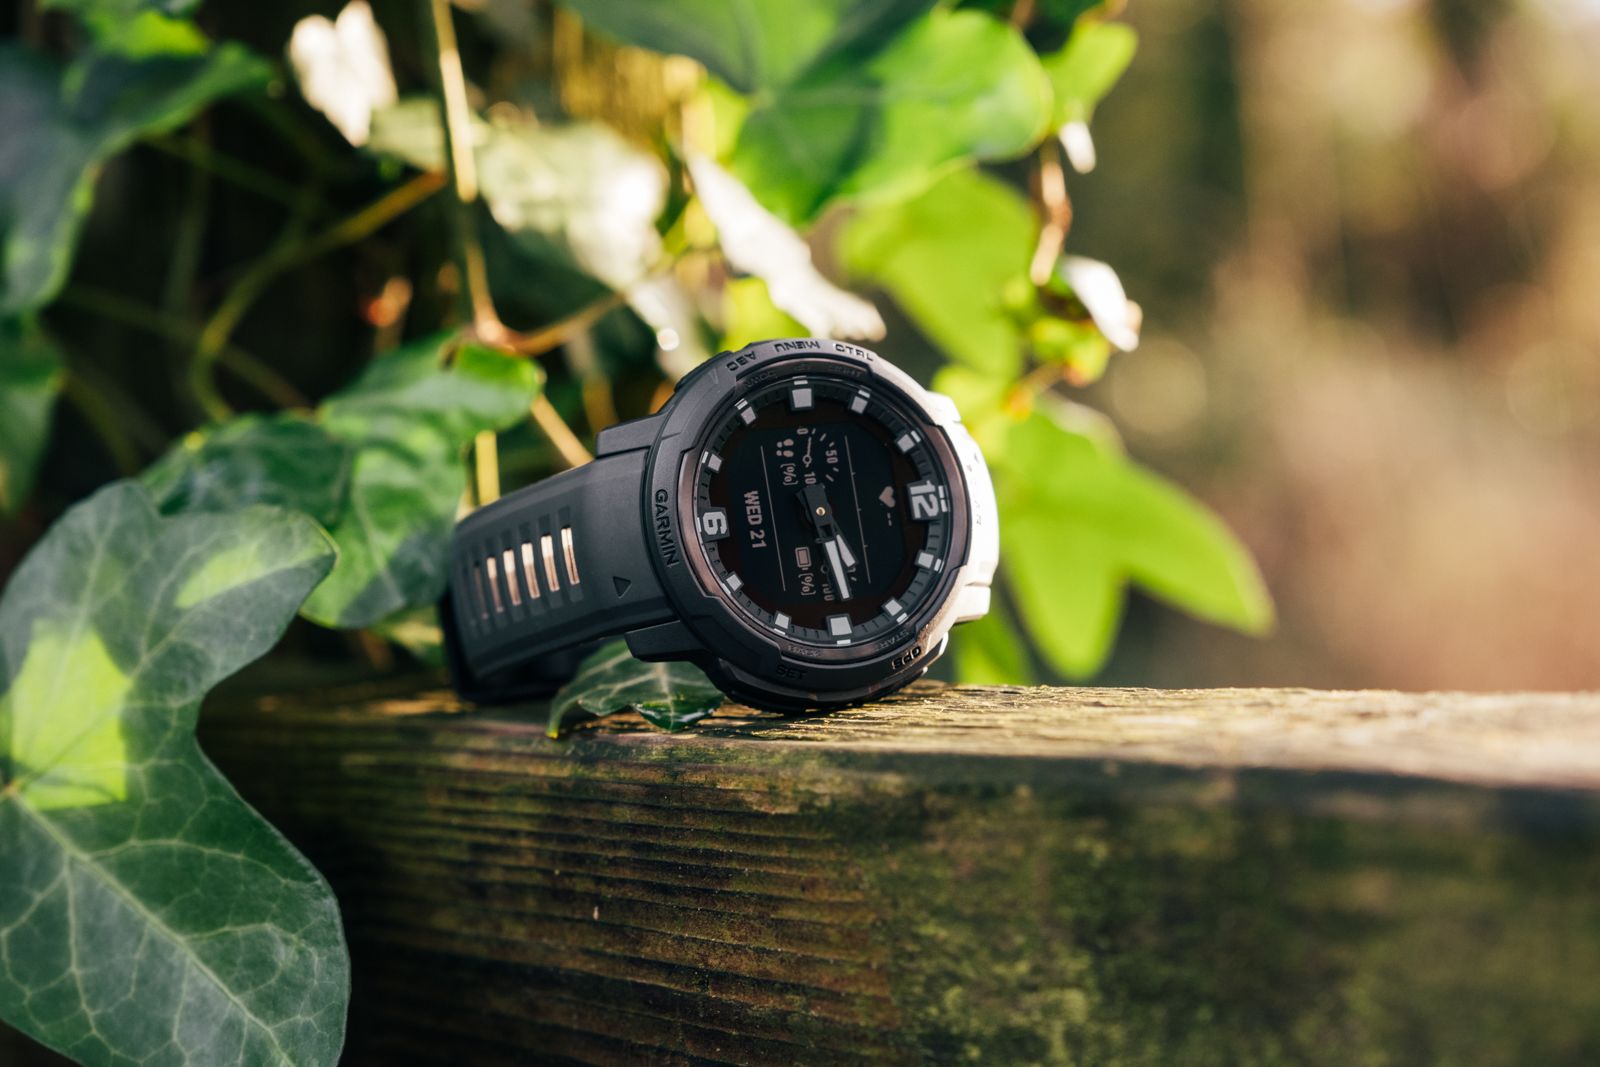 Garmin Instinct Crossover Review: Ultimate companion for adventure seekers